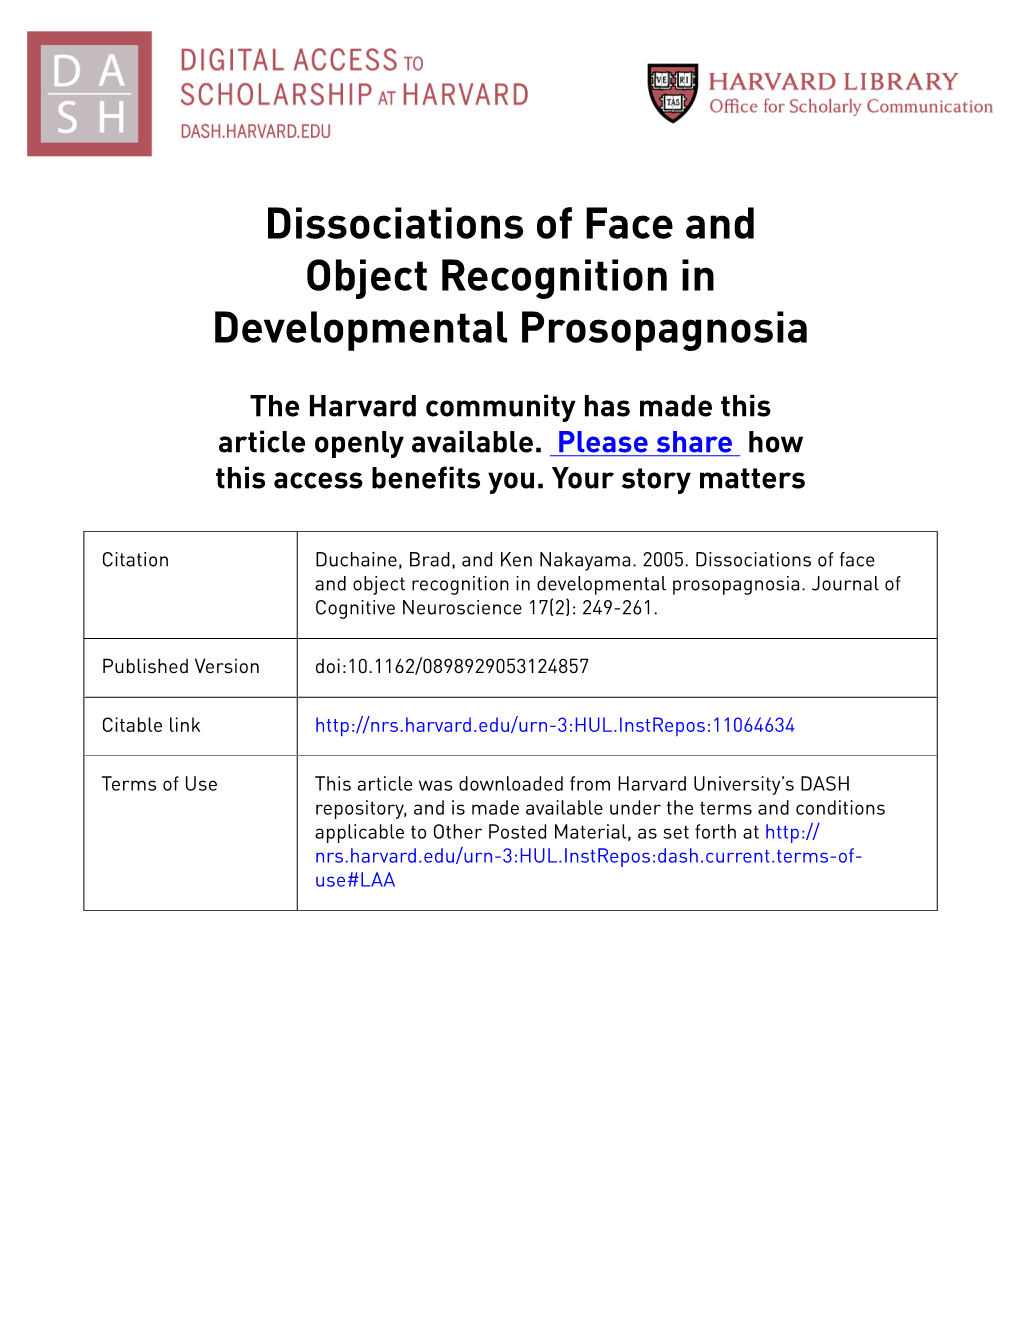 Dissociations of Face and Object Recognition in Developmental Prosopagnosia